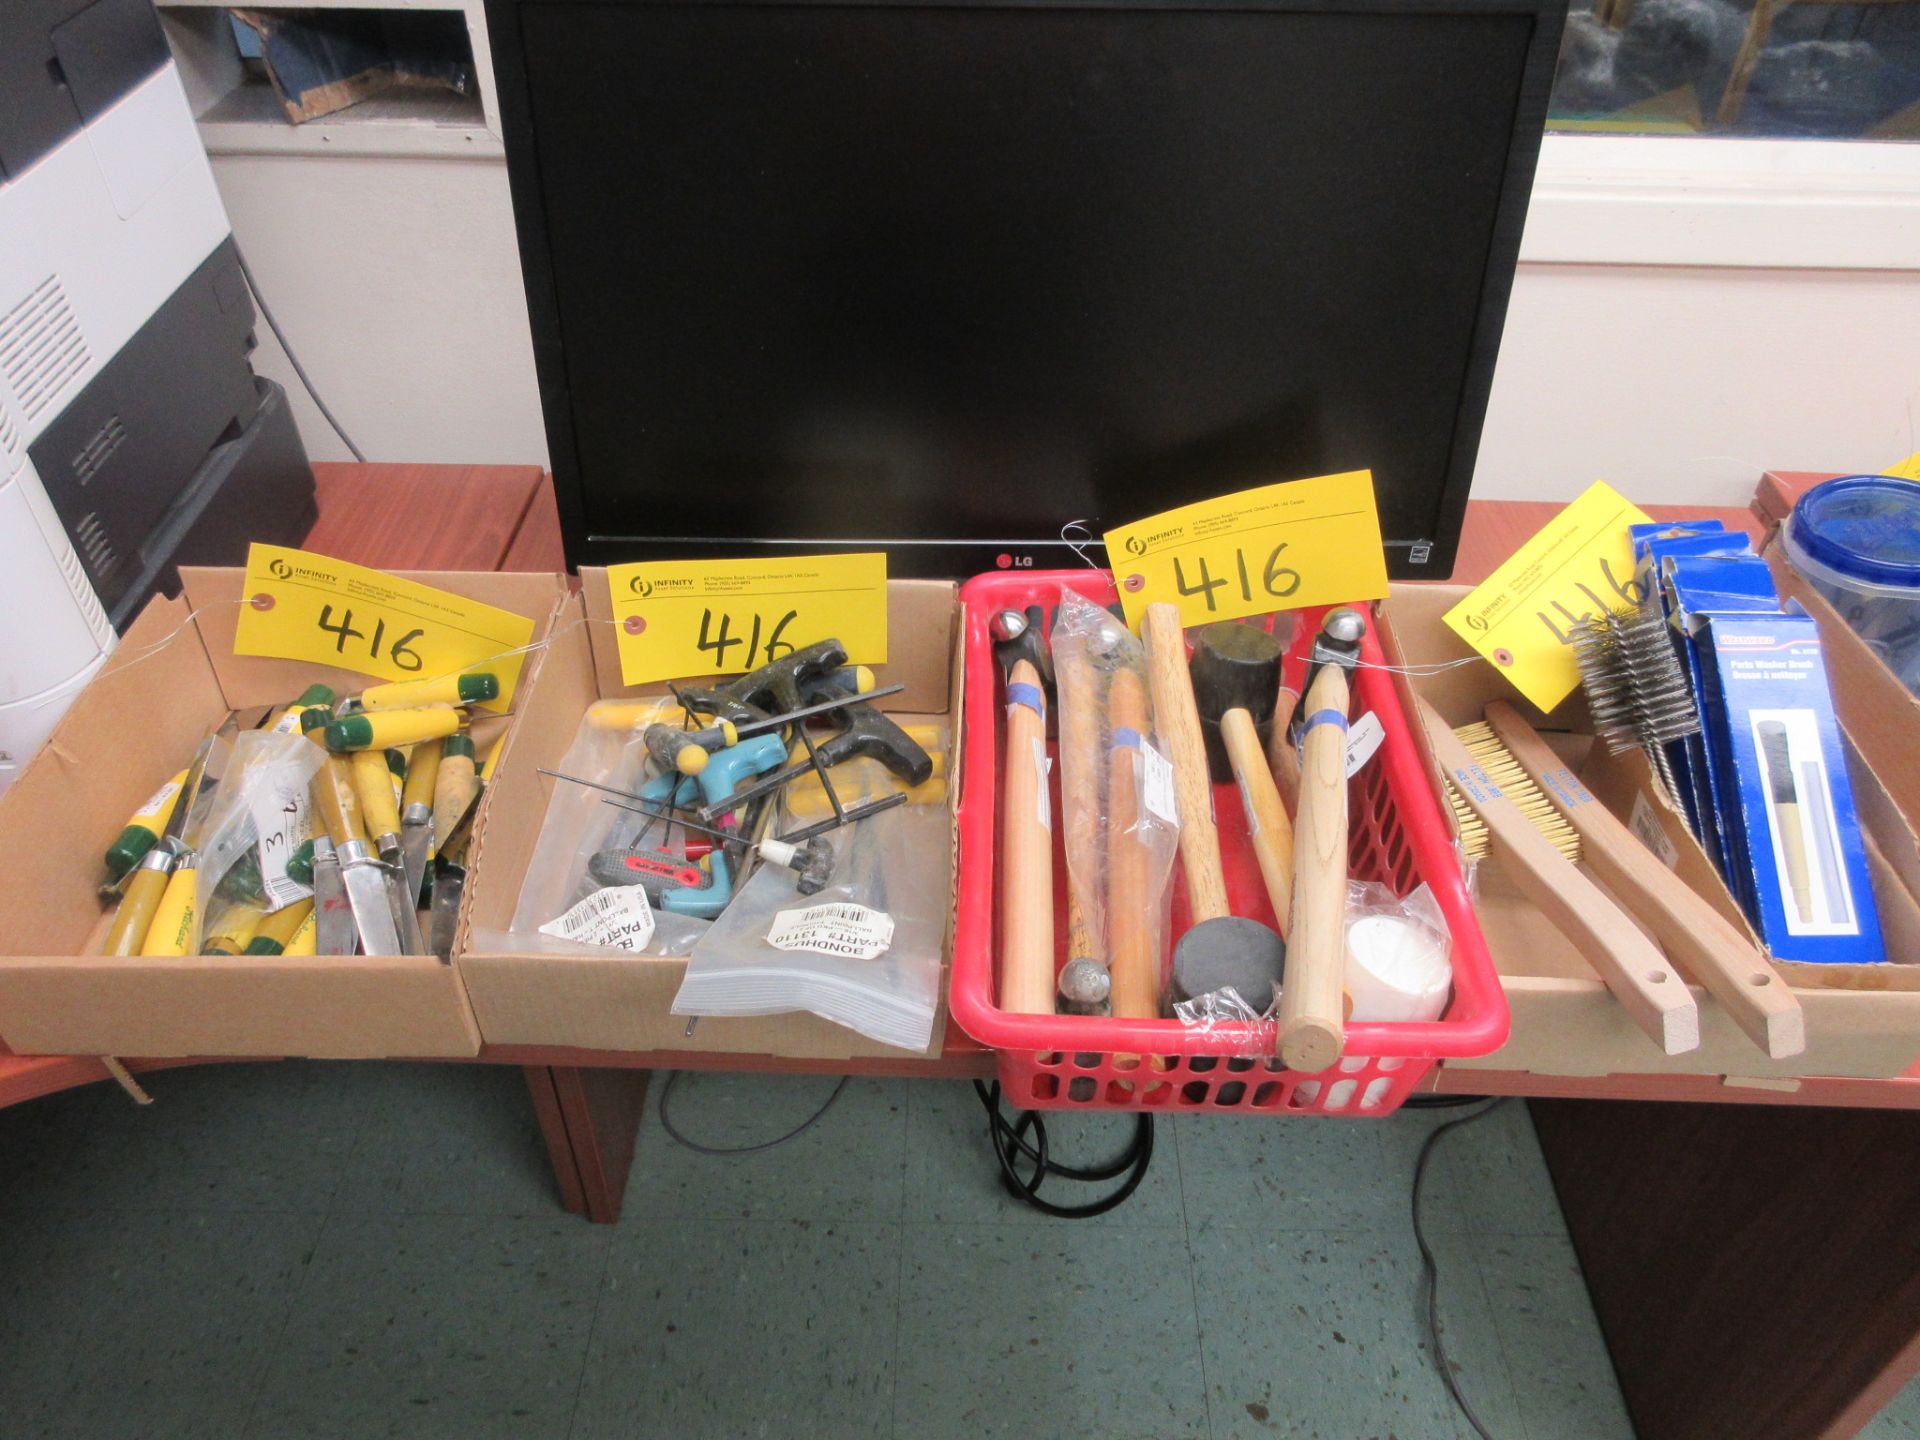 LOT OF (4) BOXES OF HAMMERS, MALLOTS, T-WRENCHES, RICHLAND KNIVES, WESTWARDS BRUSHES, ETC. (SOUTH